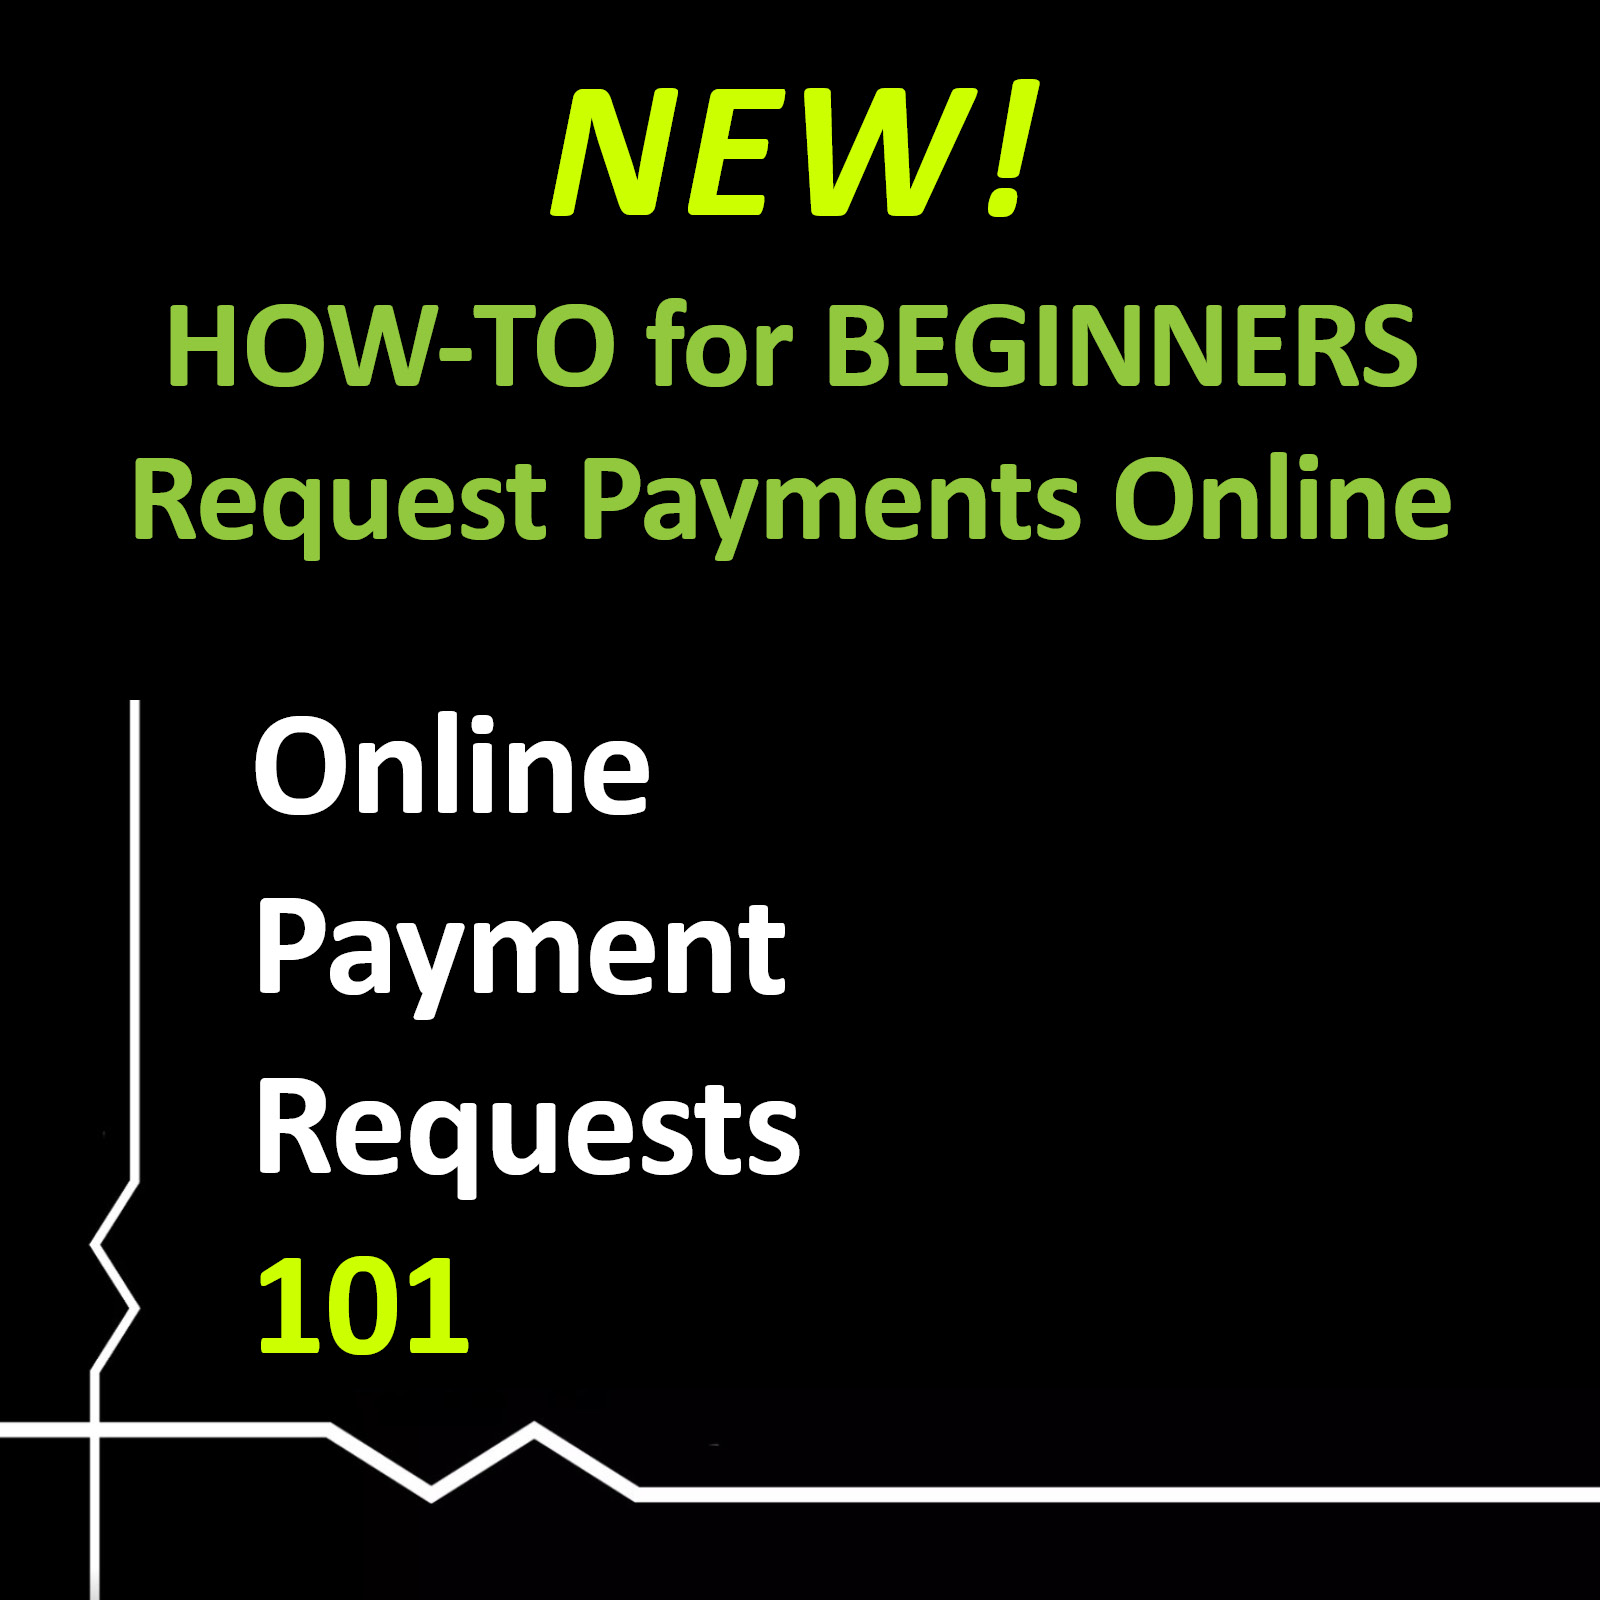 thumbnail of video saying NEW! How-to for beginners request payments online